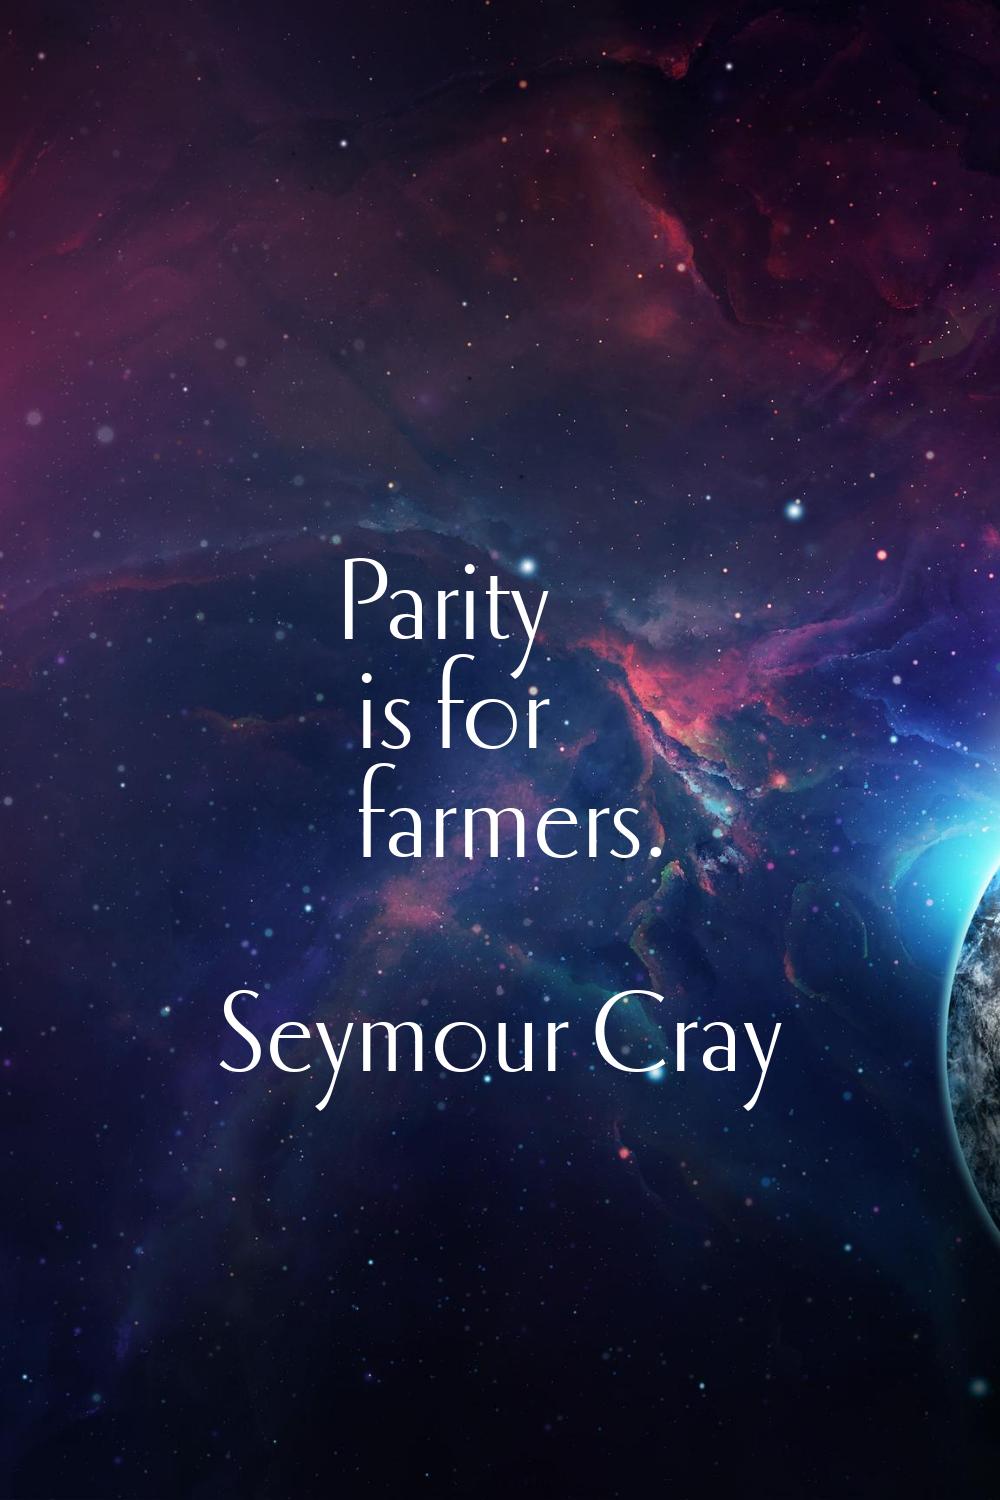 Parity is for farmers.